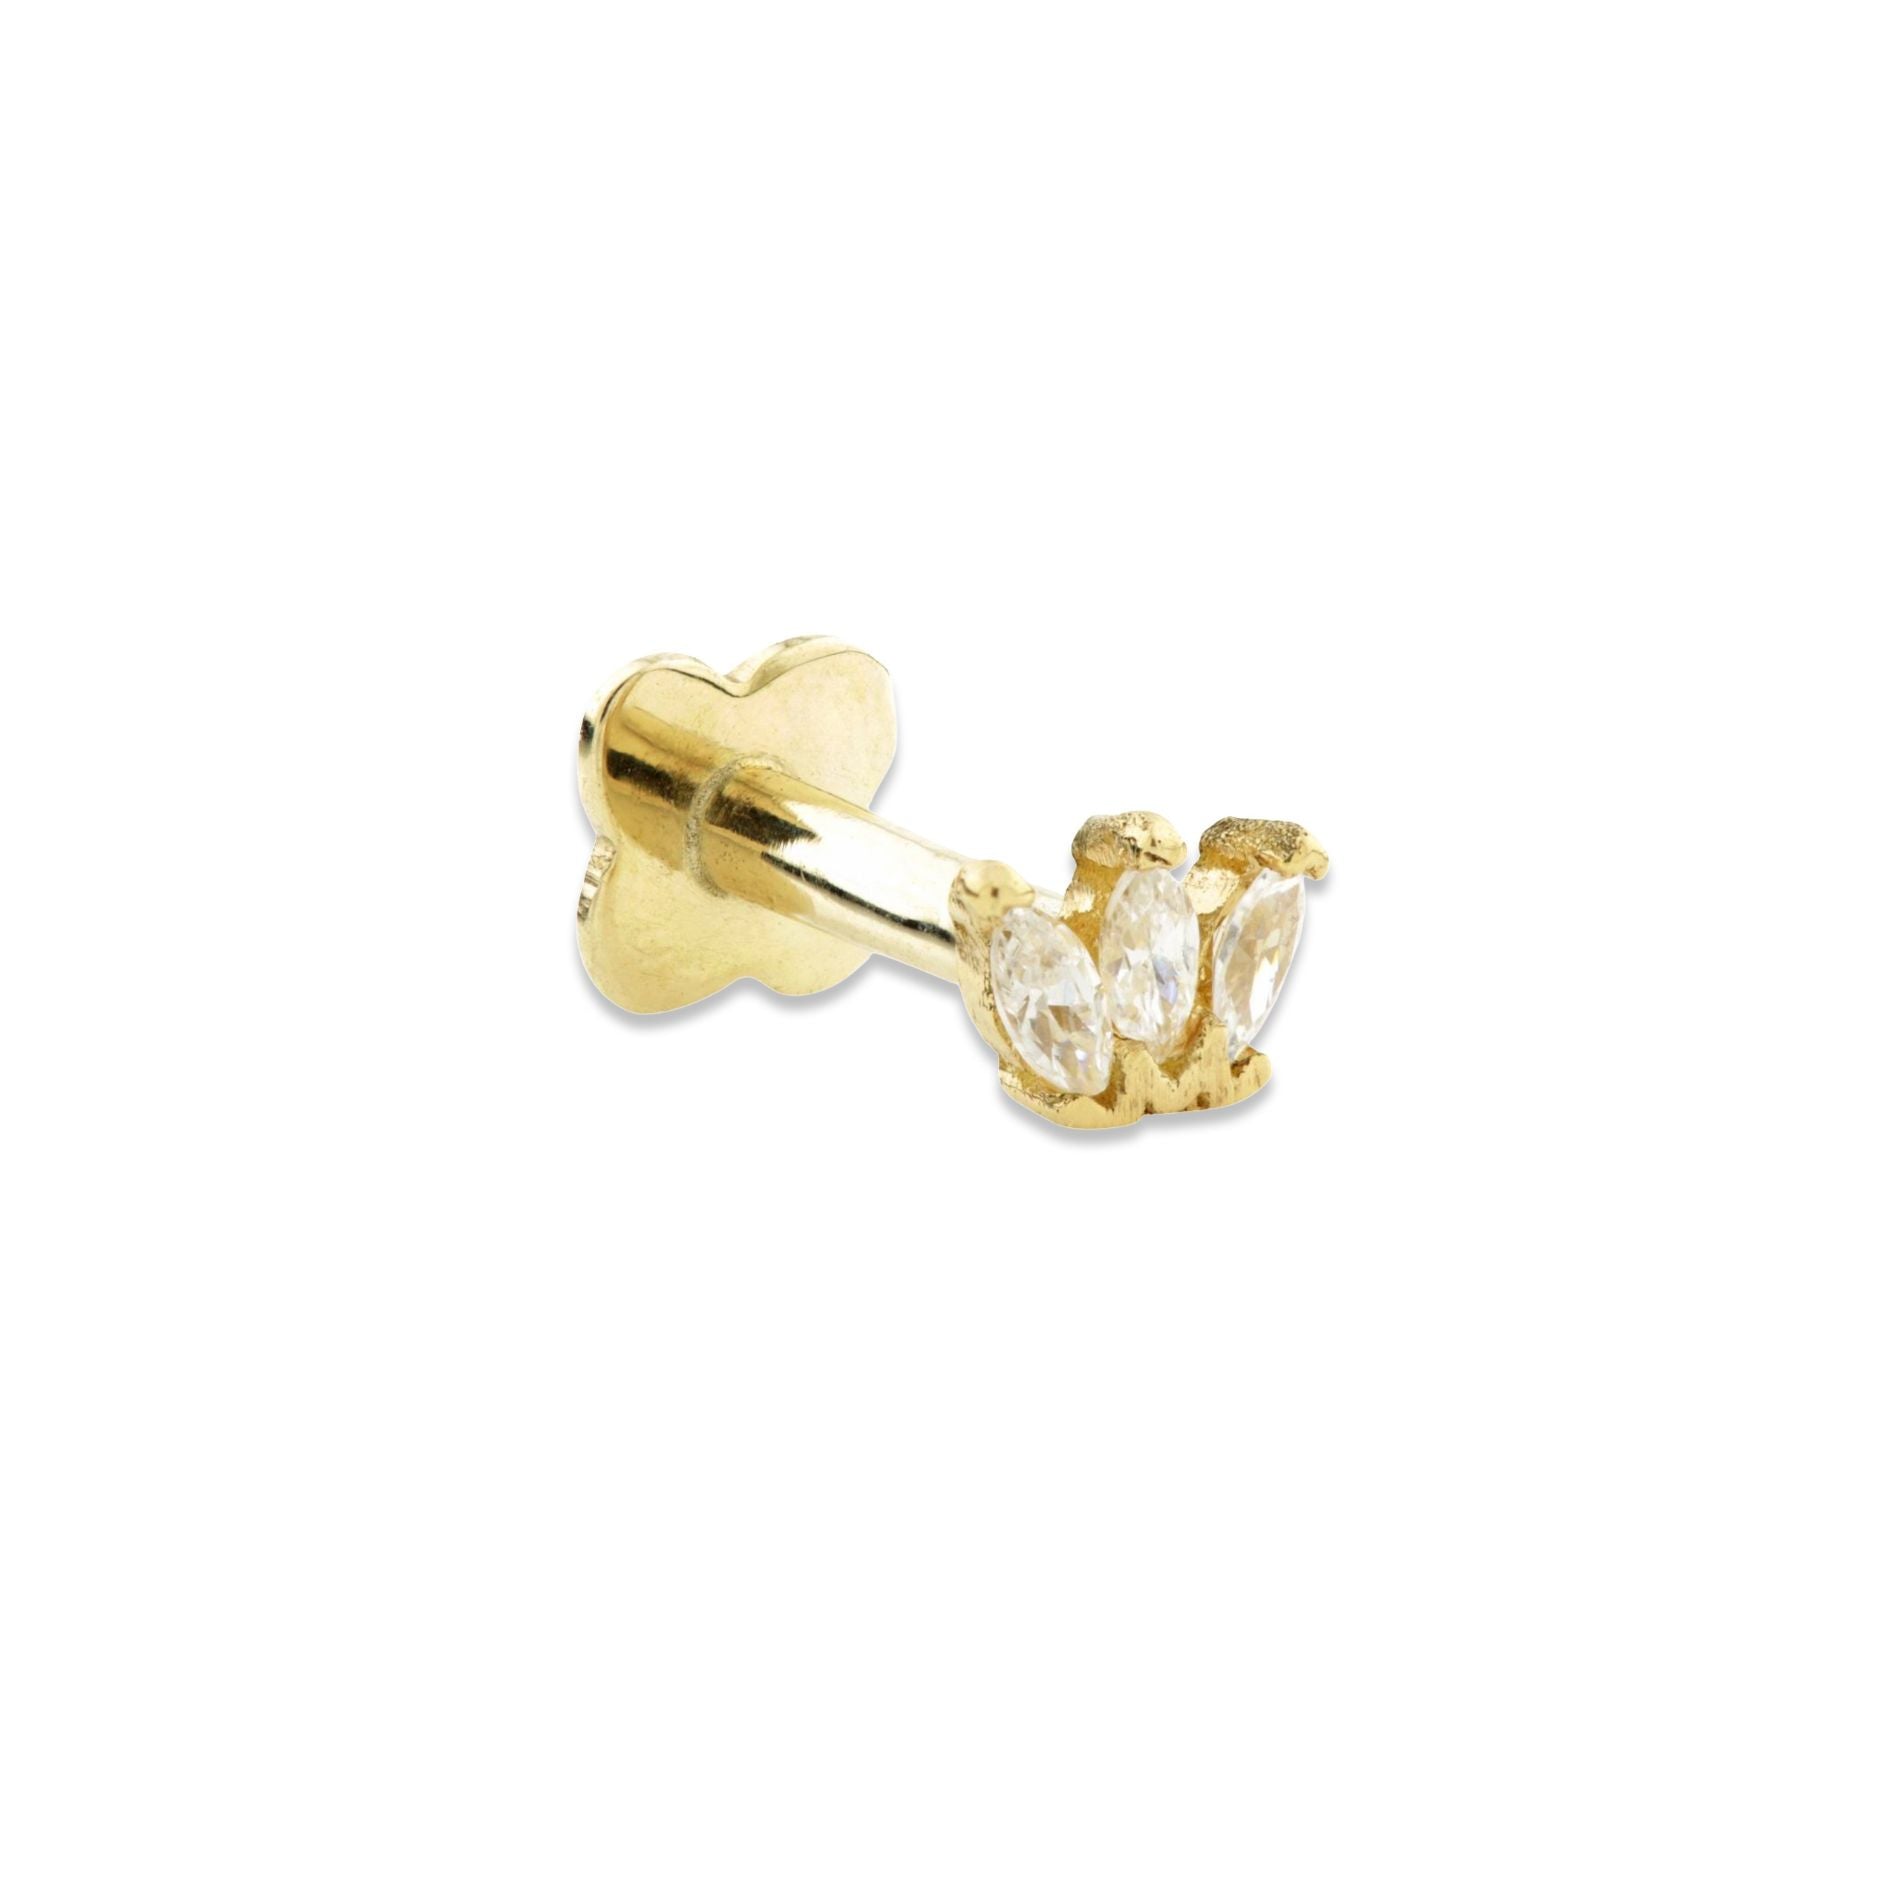 Alba tiny 9k solid yellow gold internally threaded marquise cut crystal single labret stud - Helix & Conch